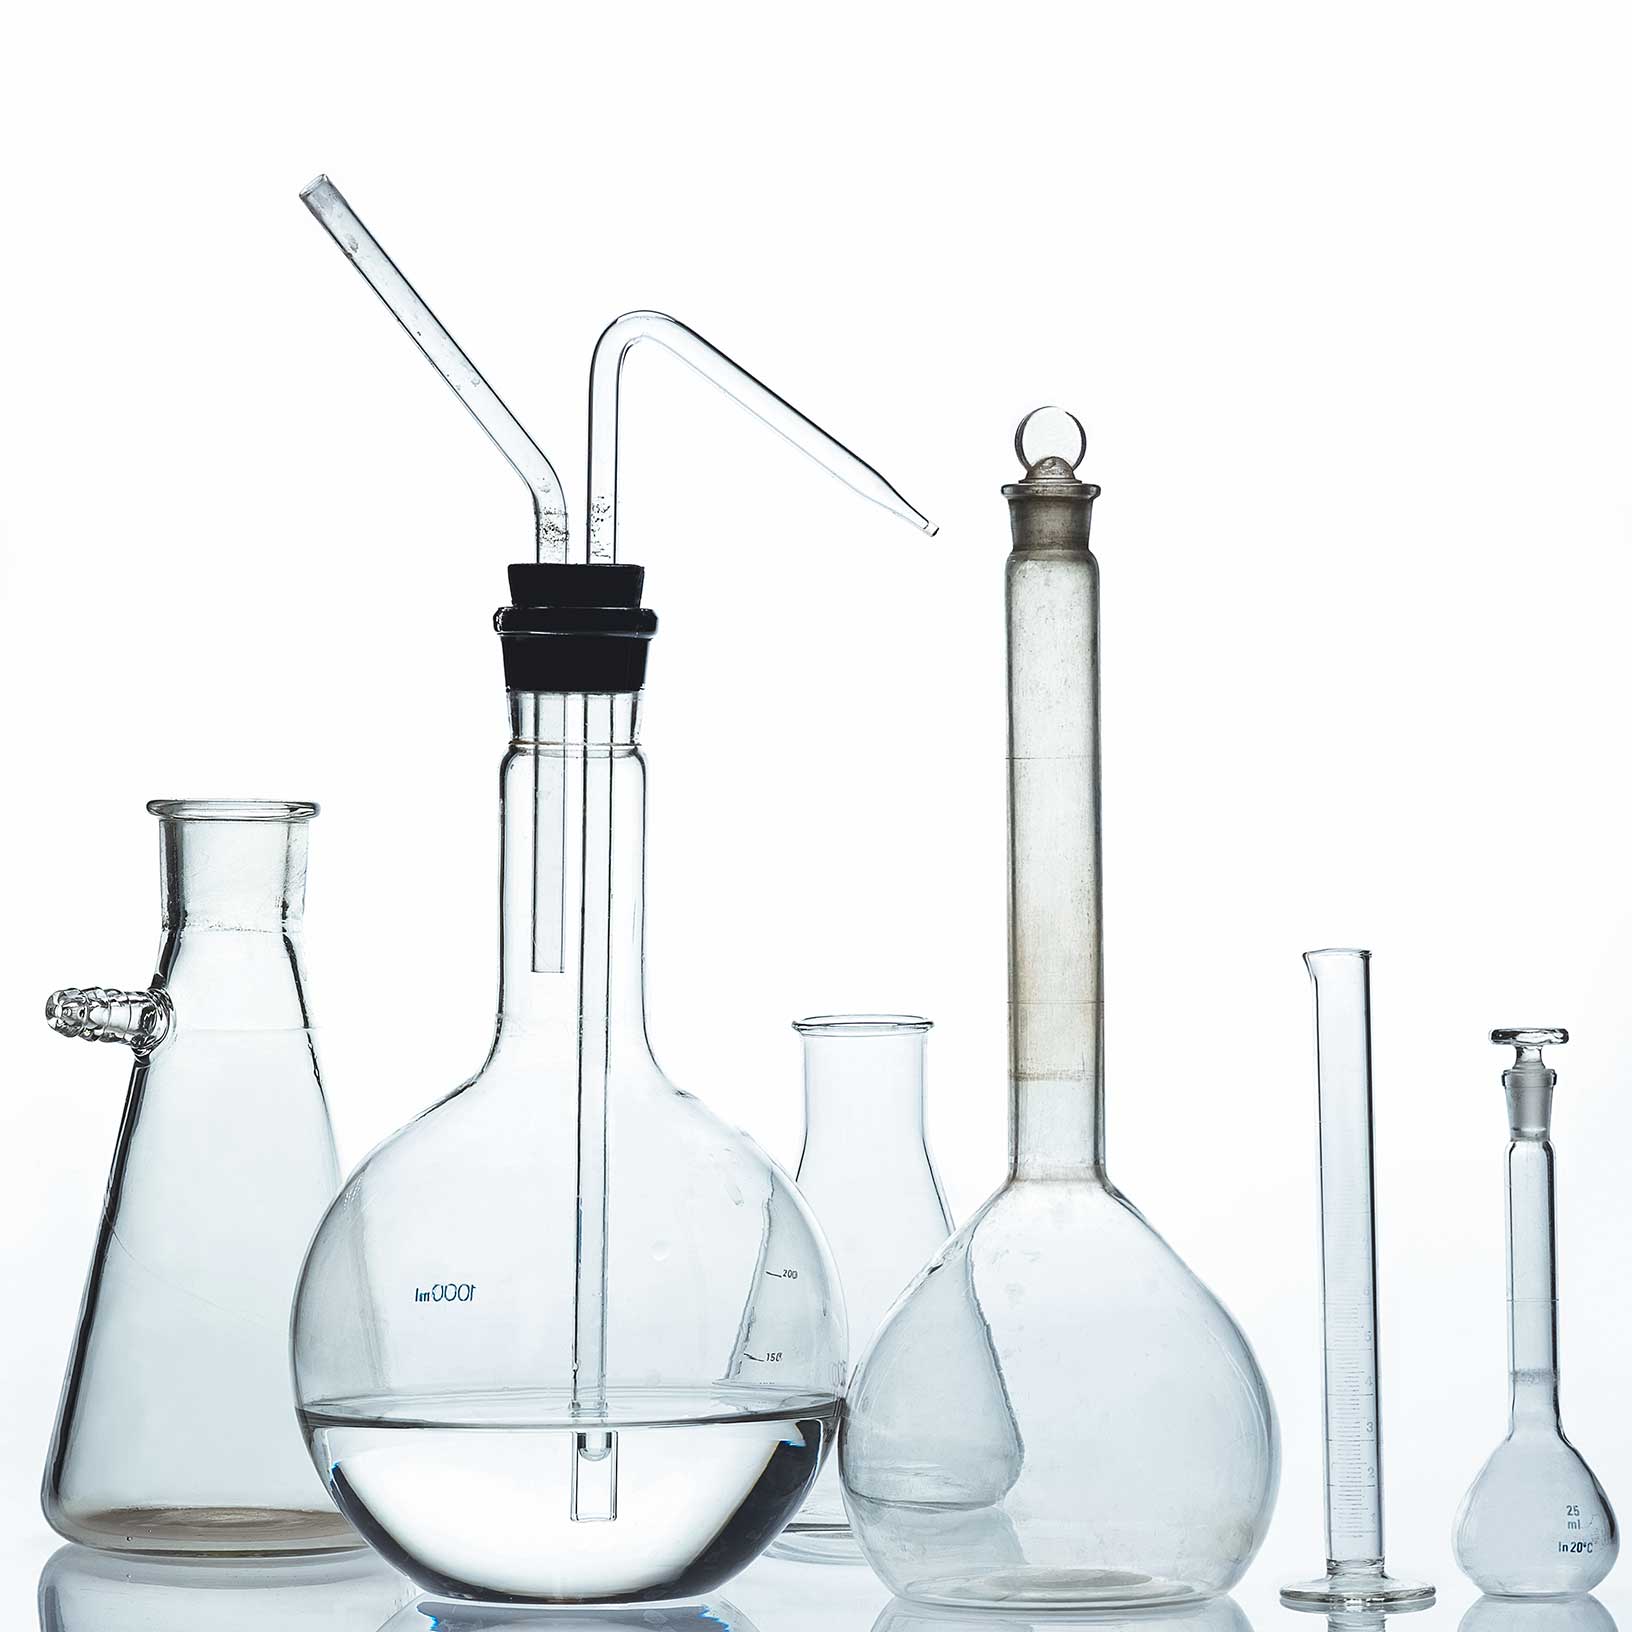 Glassware for use in healthcare and life sciences industry research and development (R&D) 